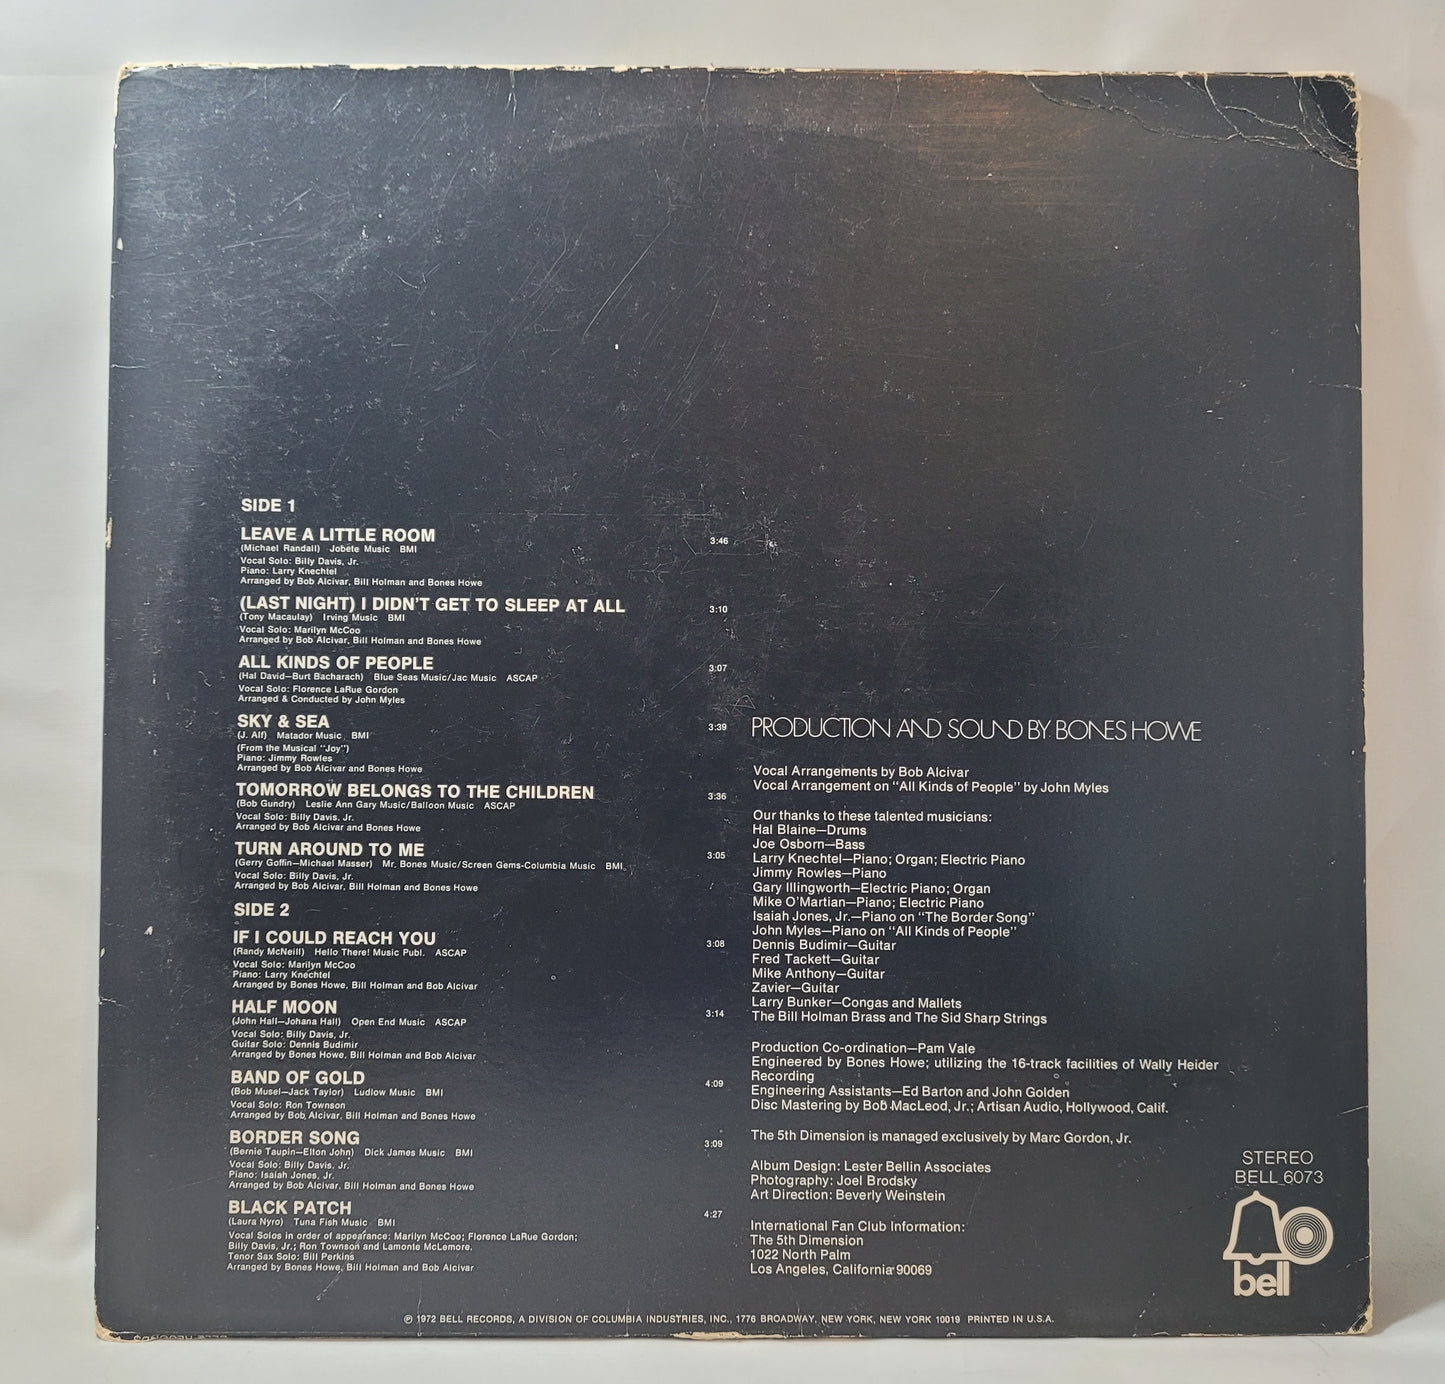 The 5th Dimension - Individually & Collectively [Vinyl Record LP]